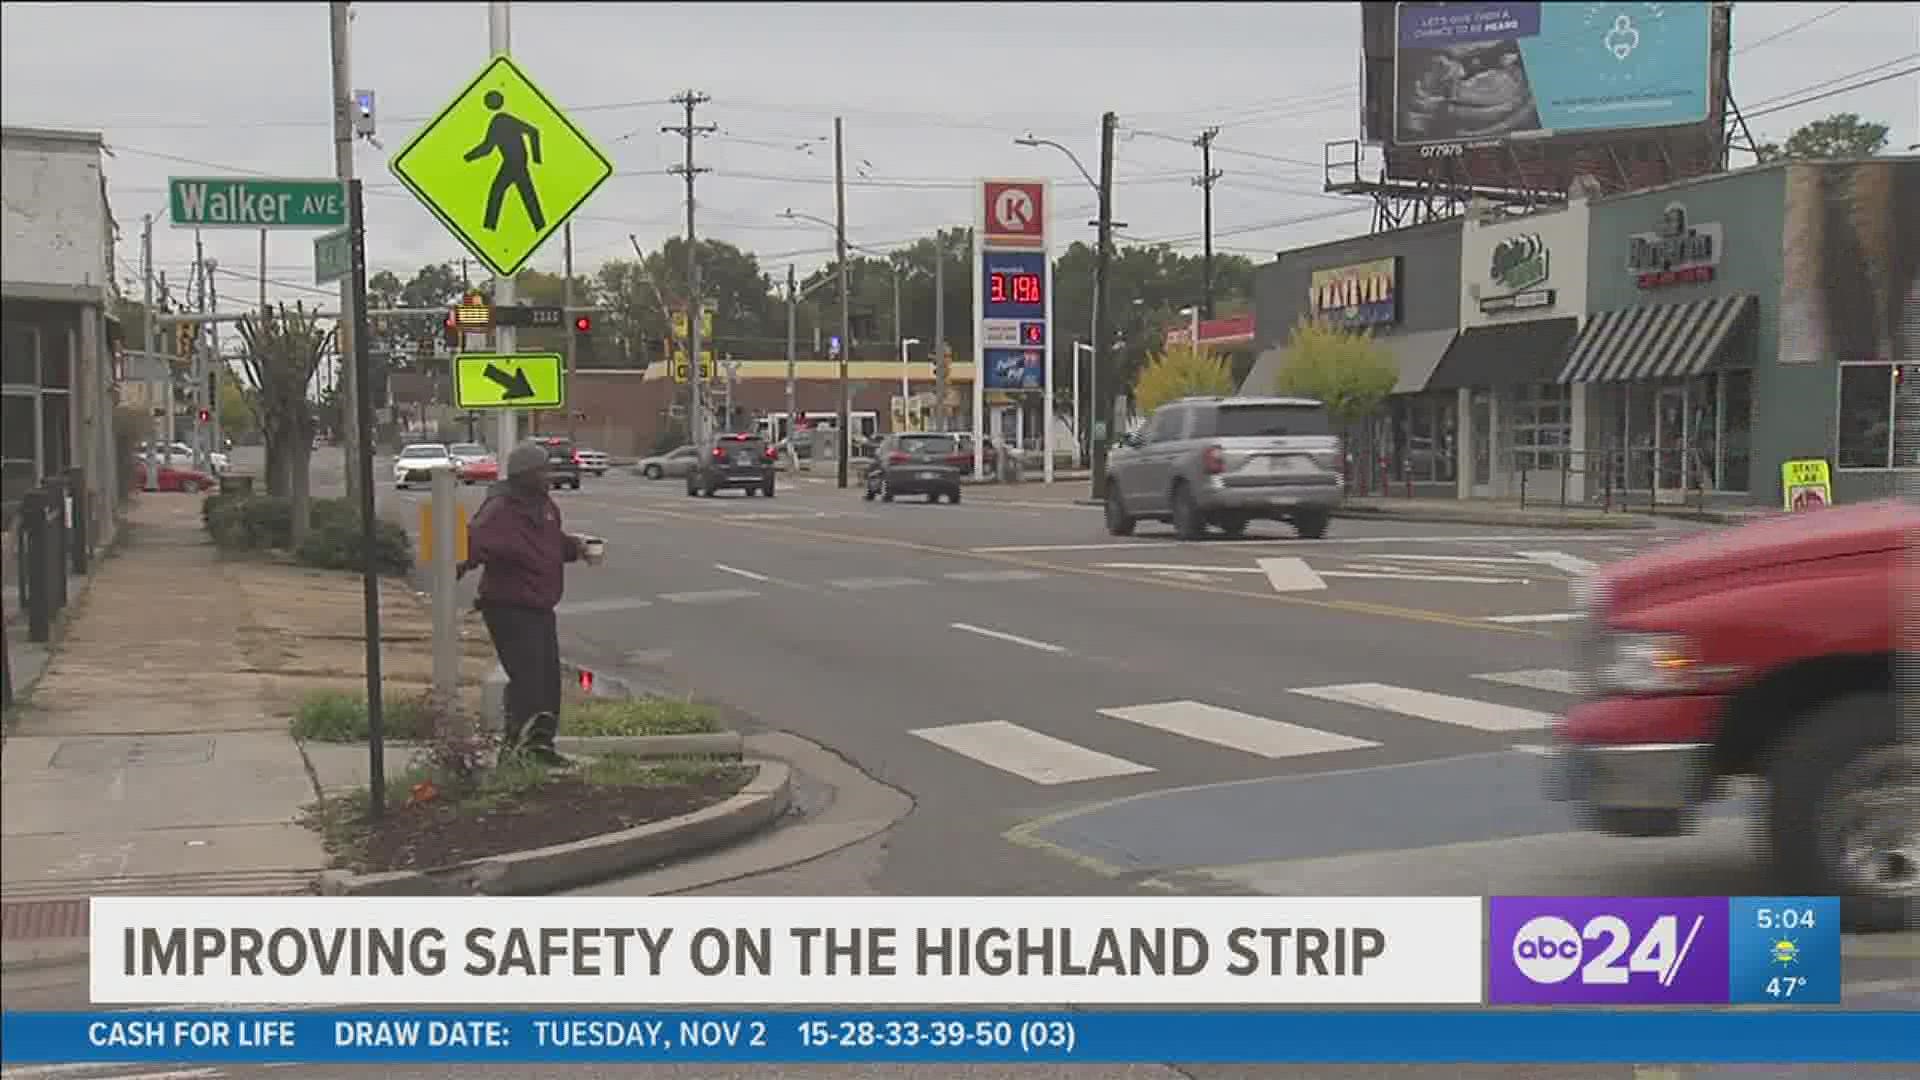 Over the next ten months, work will be done on the area along Highland Street from Midland Avenue to Southern Avenue to improve safety features.